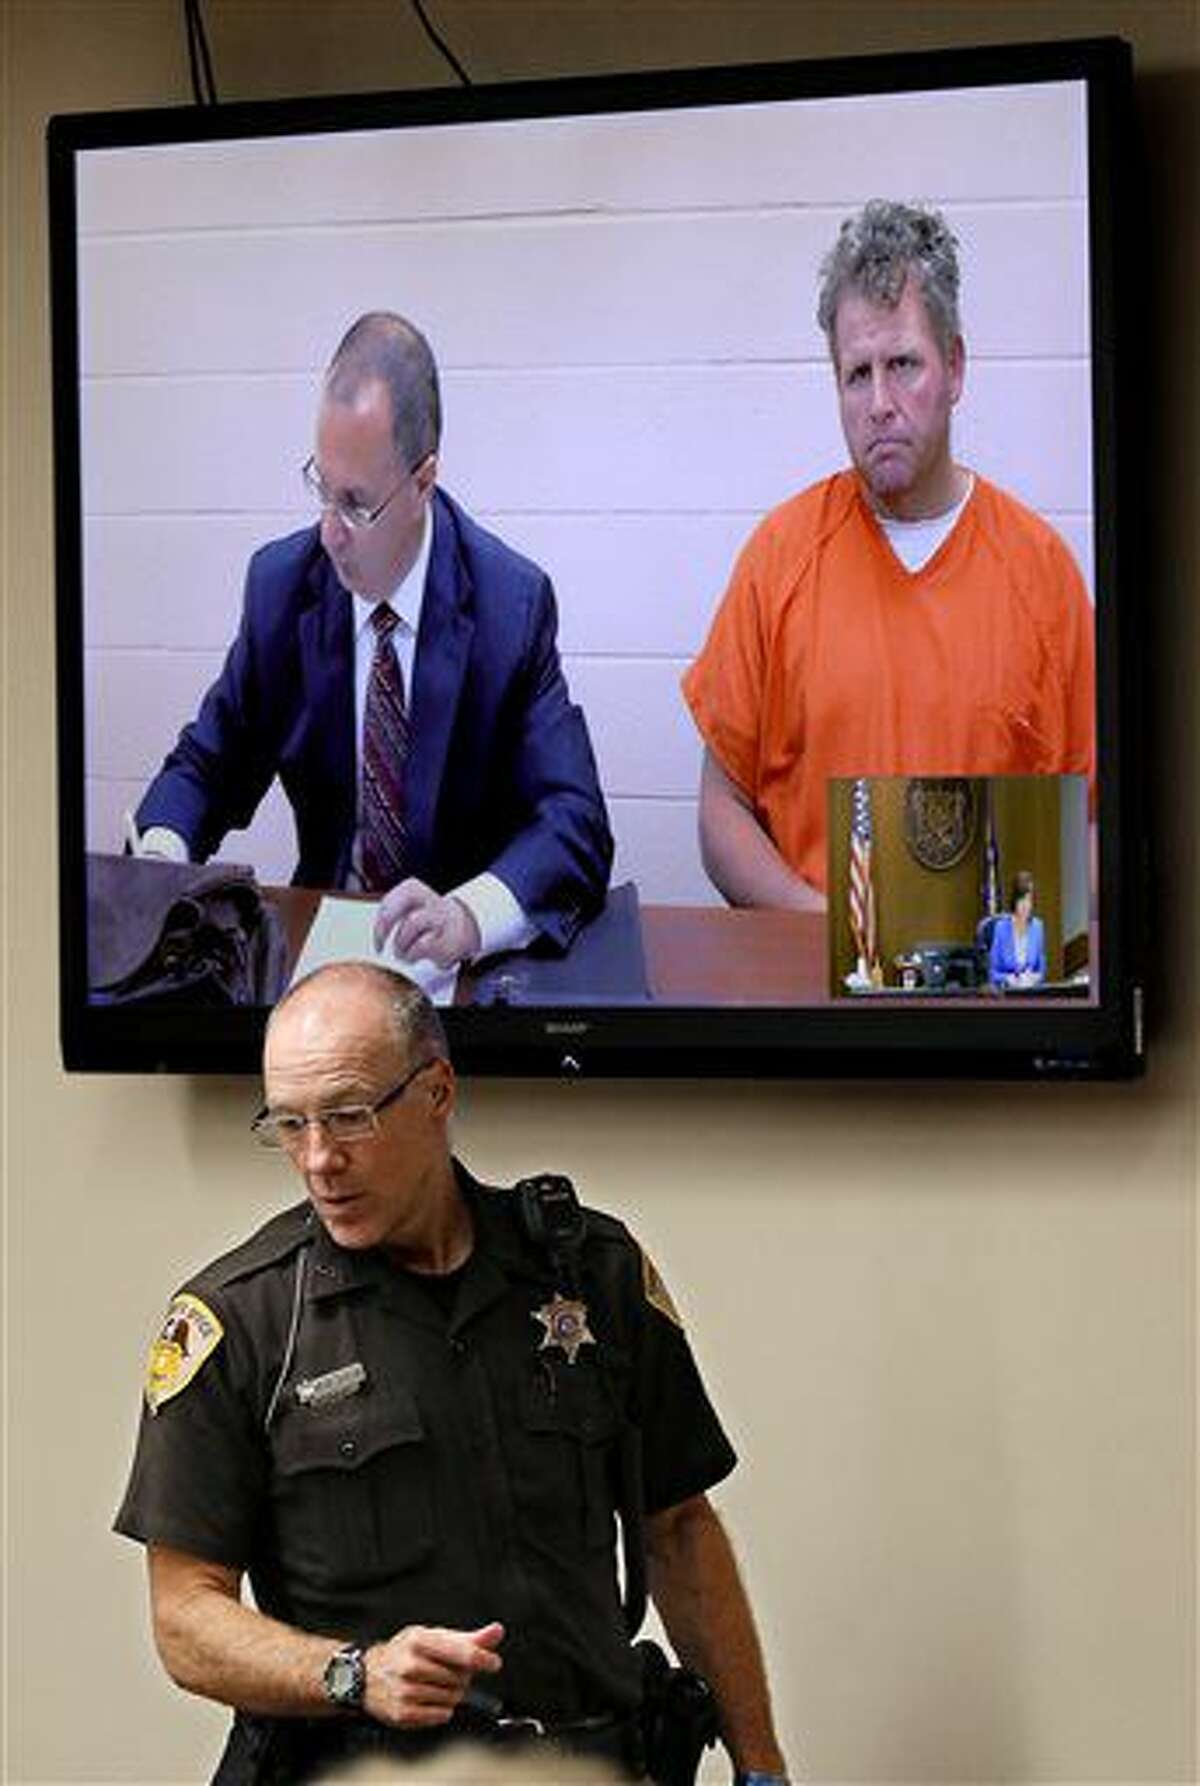 Sheriff's Deputy Scott Kuehn monitors the courtroom as Shane Helmbrecht appears via video to face formal charges Thursday, Aug. 4, 2016, in Eau Claire County Court in Eau Claire, Wis. Helmbrecht who was charged with fatally shooting his neighbor, told police he was constantly hearing voices in his head. (Dan Reiland/The Eau Claire Leader-Telegram via AP) MANDATORY CREDIT